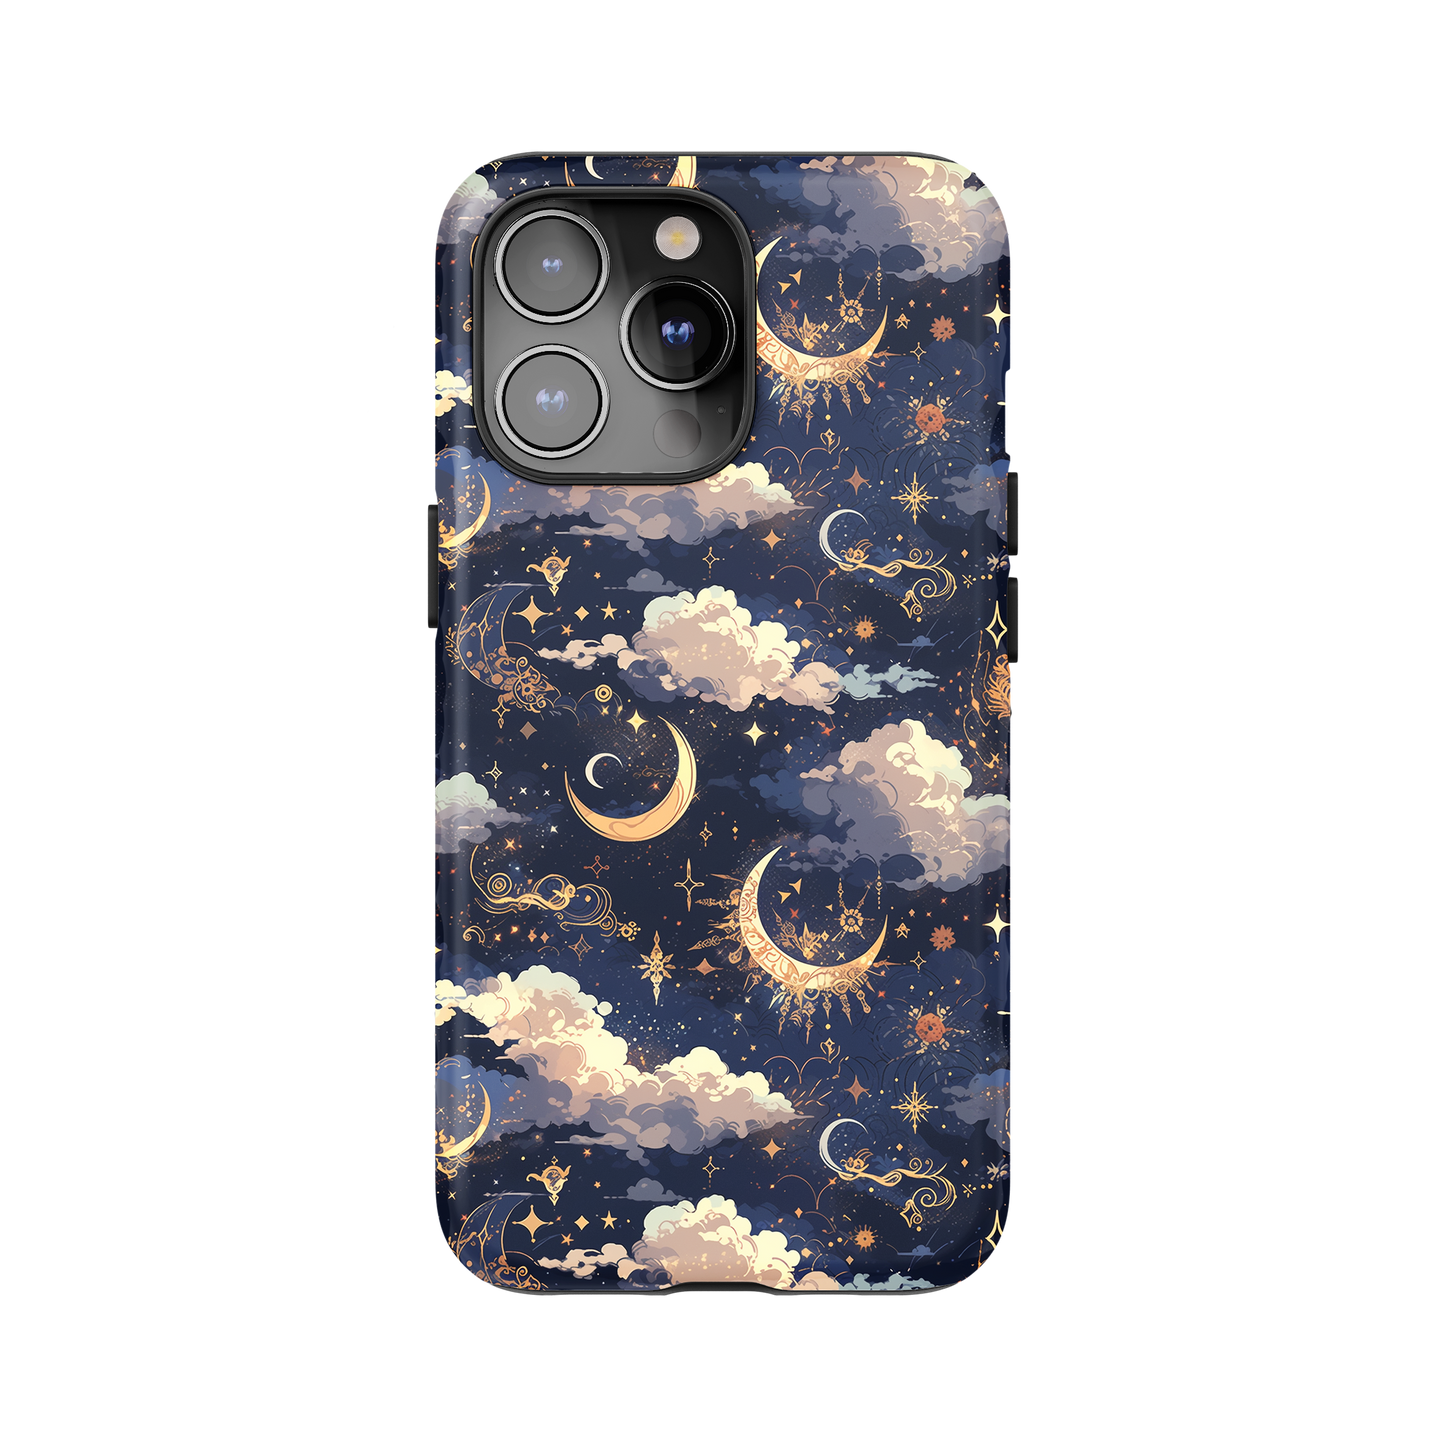 Celestial Moon and Stars Phone Case for iPhone and Samsung